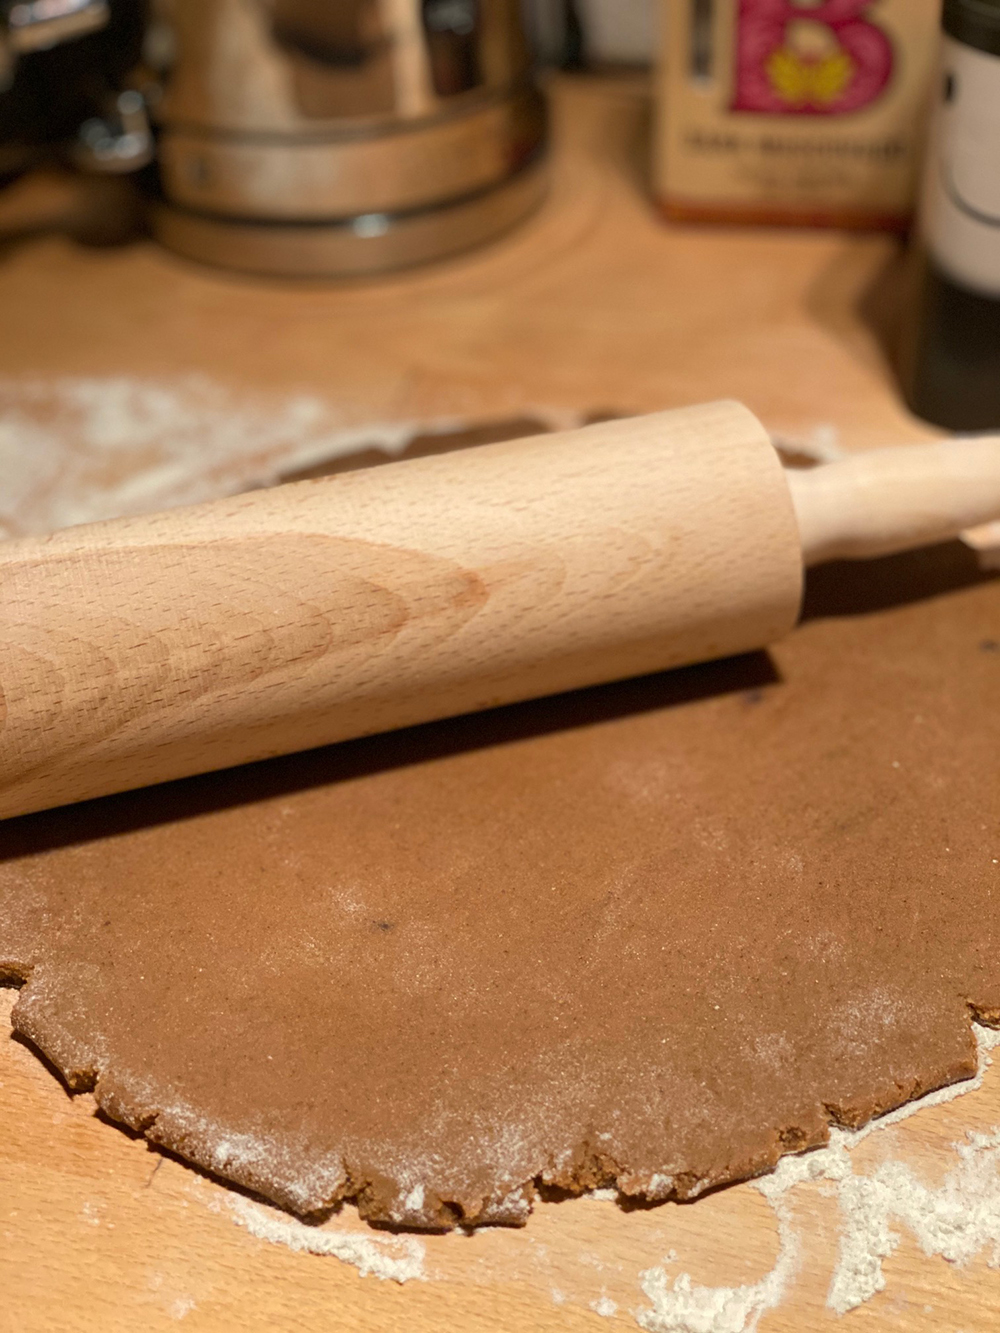 The biscuit dough is rolled out into a flat oval with a rolling pin.